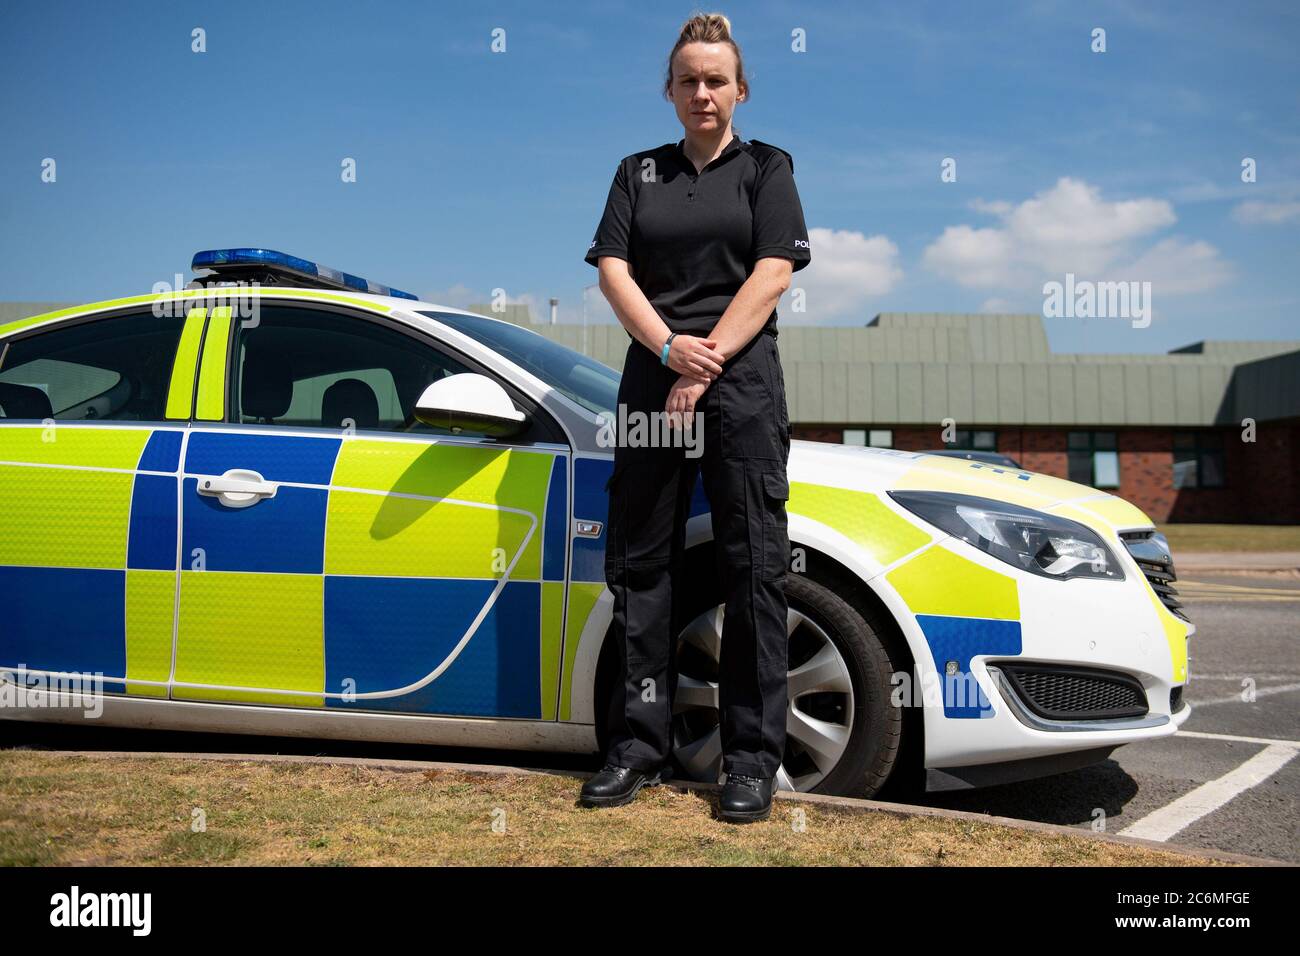 New police recruit Verity Steele outside Staffordshire Police HQ. Verity has been signed up and trained as part of the 20,000 recruitment scheme by the Home Office. More than 70,000 people applied to become police officers in the first six months of the Government's recruitment drive. Stock Photo